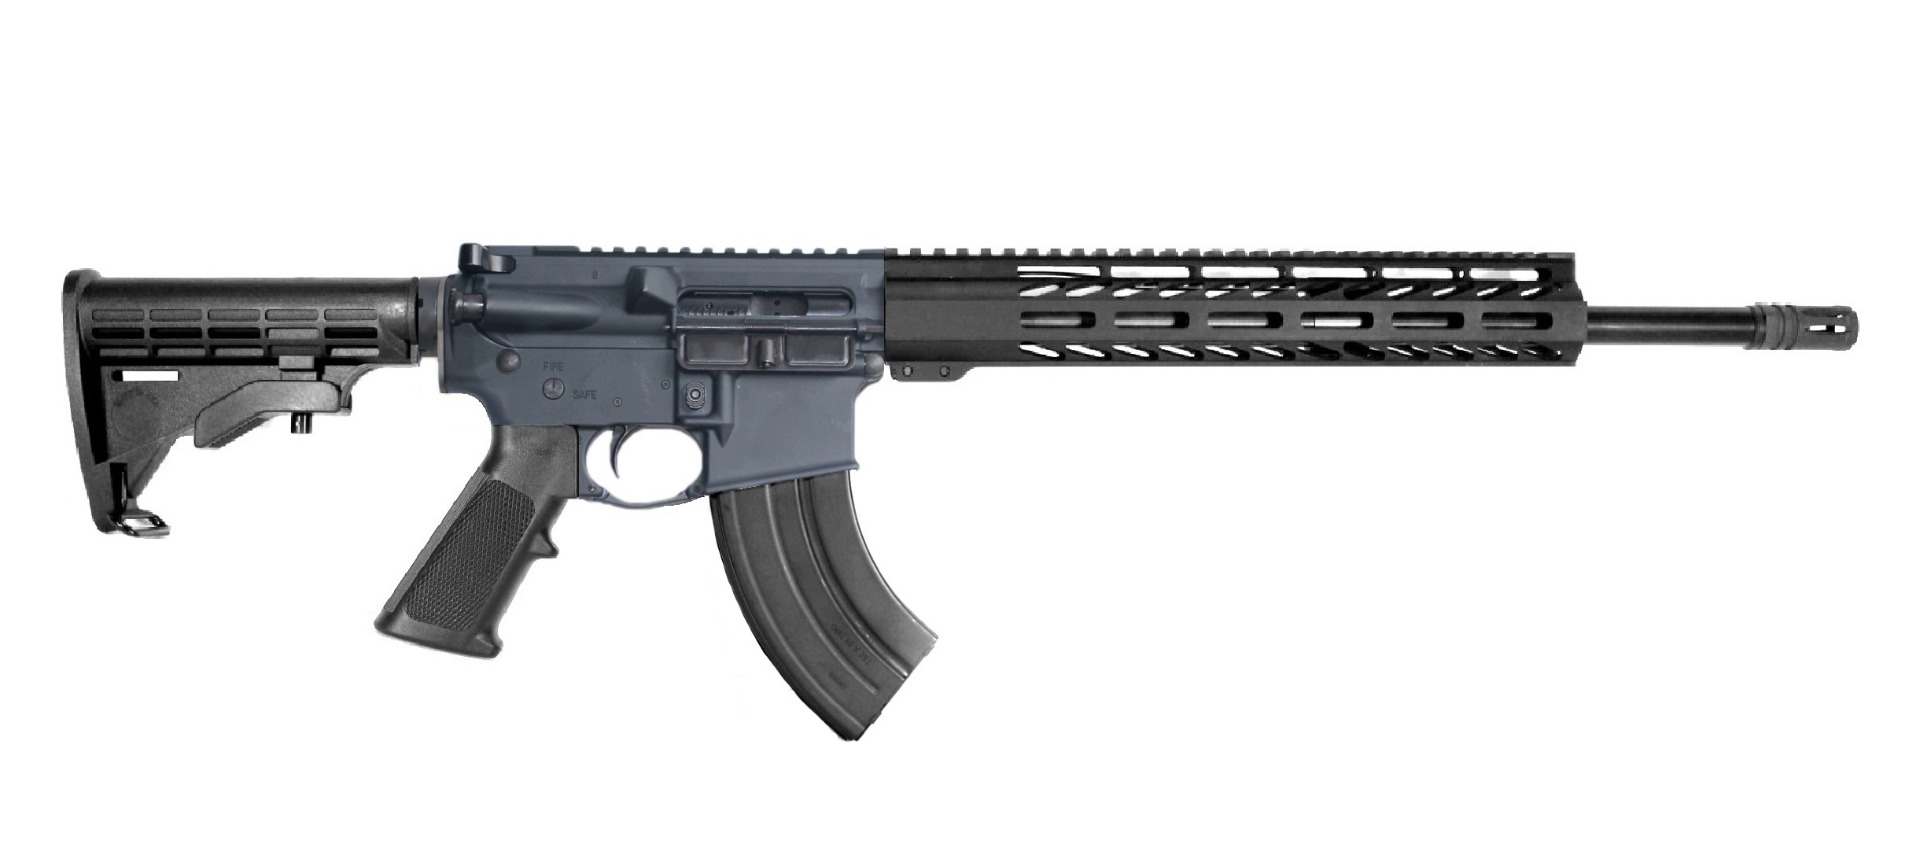 Shop 16 inch 7.62x39 AR-15 Rifles - In Stock & Ready to Ship